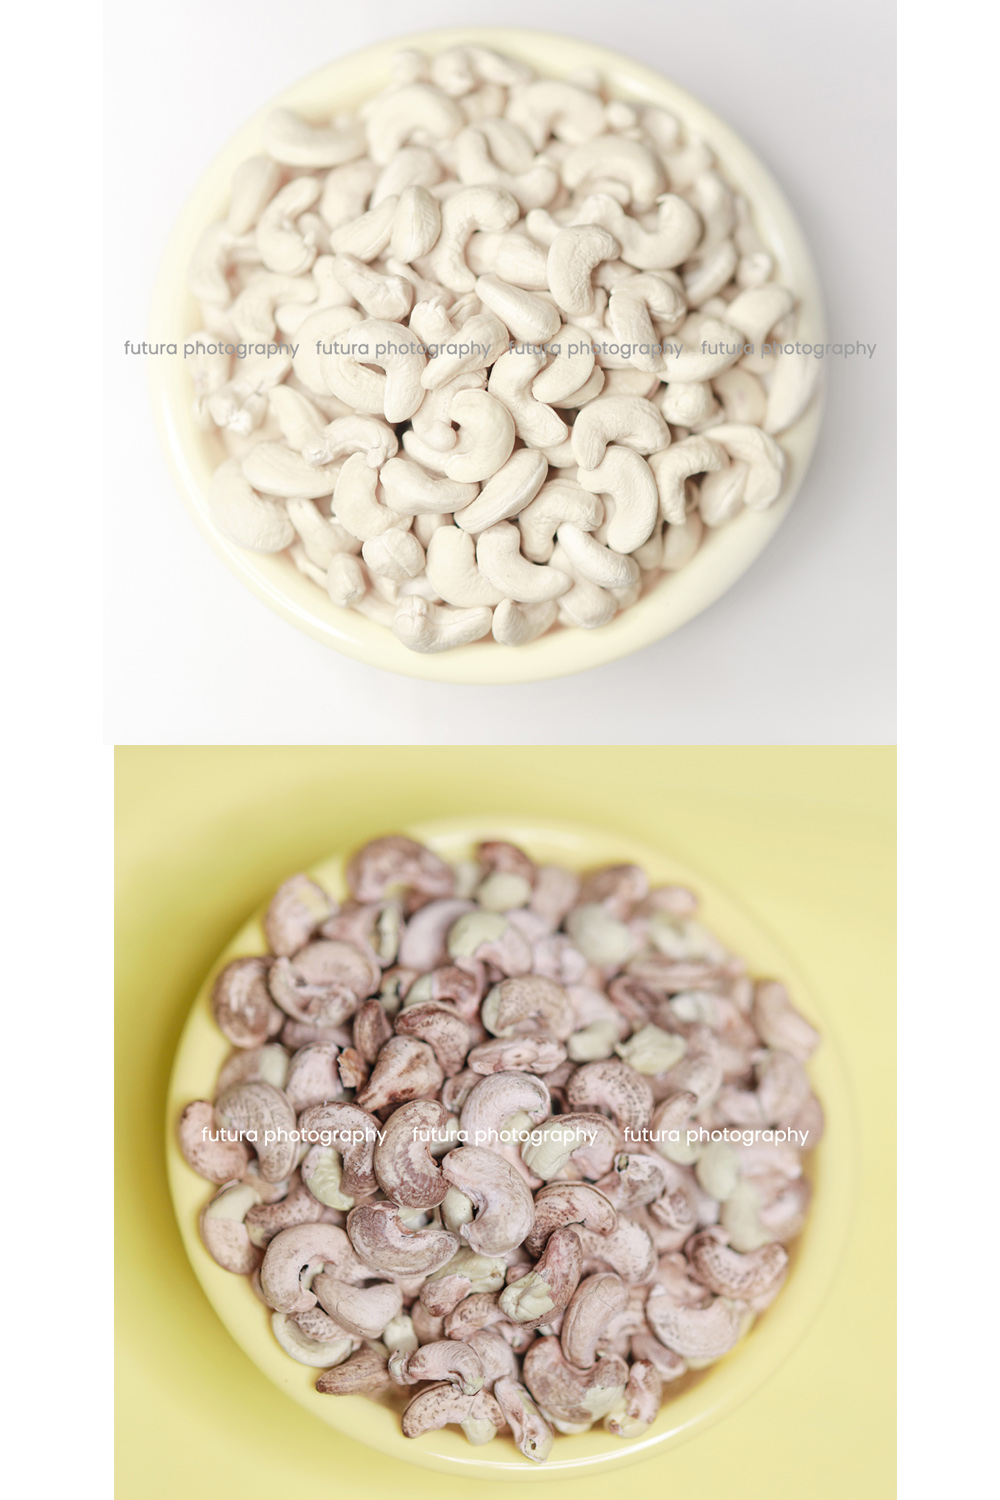 Two pictures of a bowl of cashews and a bowl of cashews.